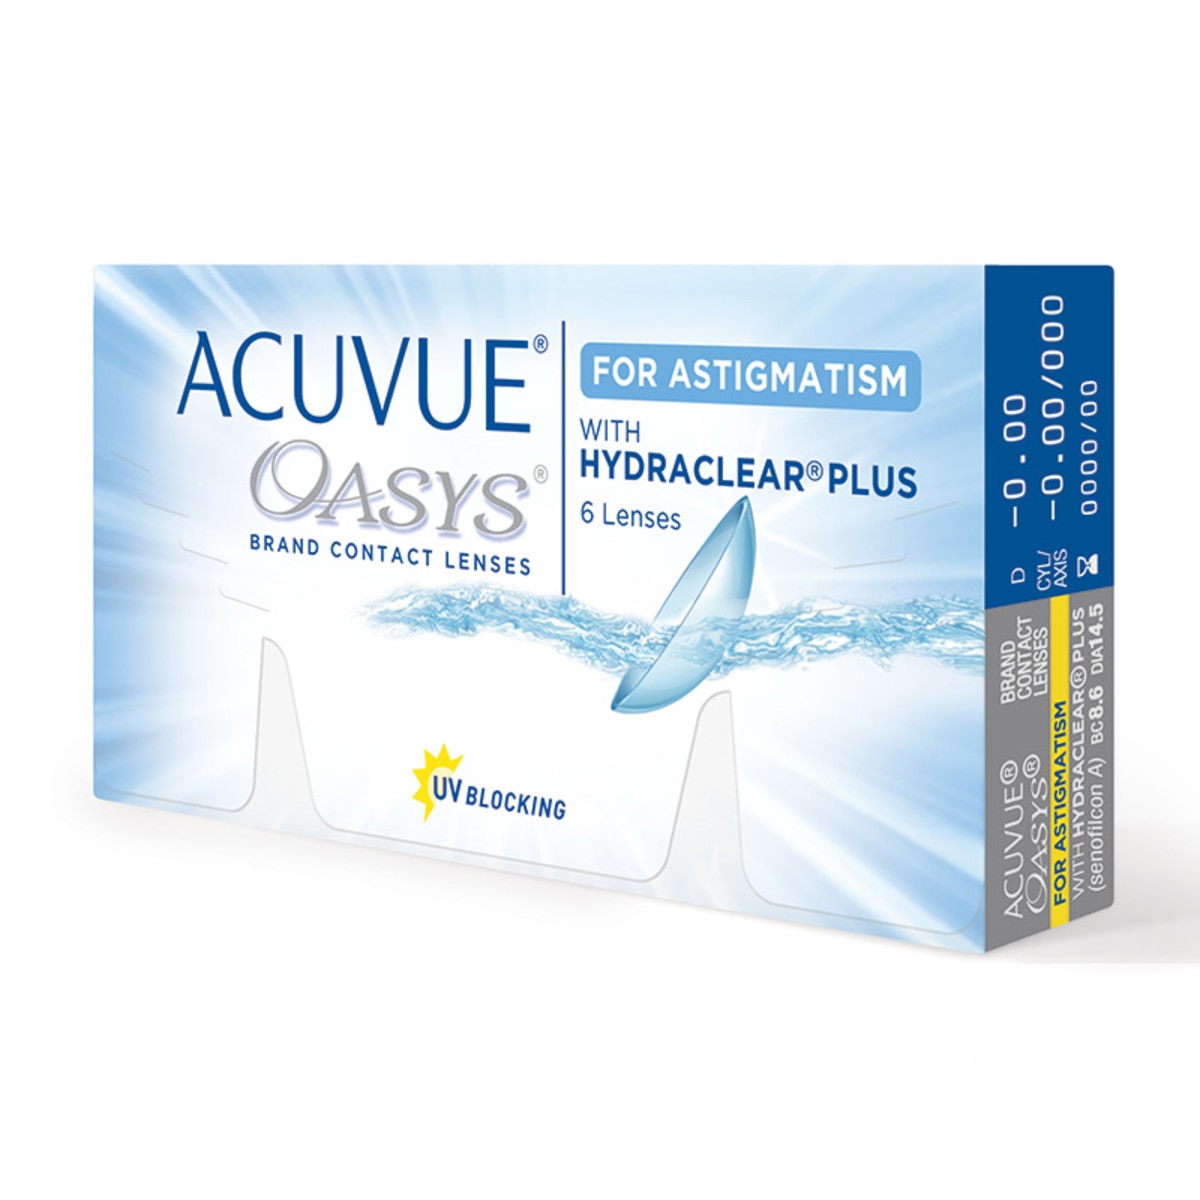 ACUVUE OASYS® con HYDRACLEAR Plus® para Astigmatismo (D -0.5, Cyl/Axis -2.25/90)